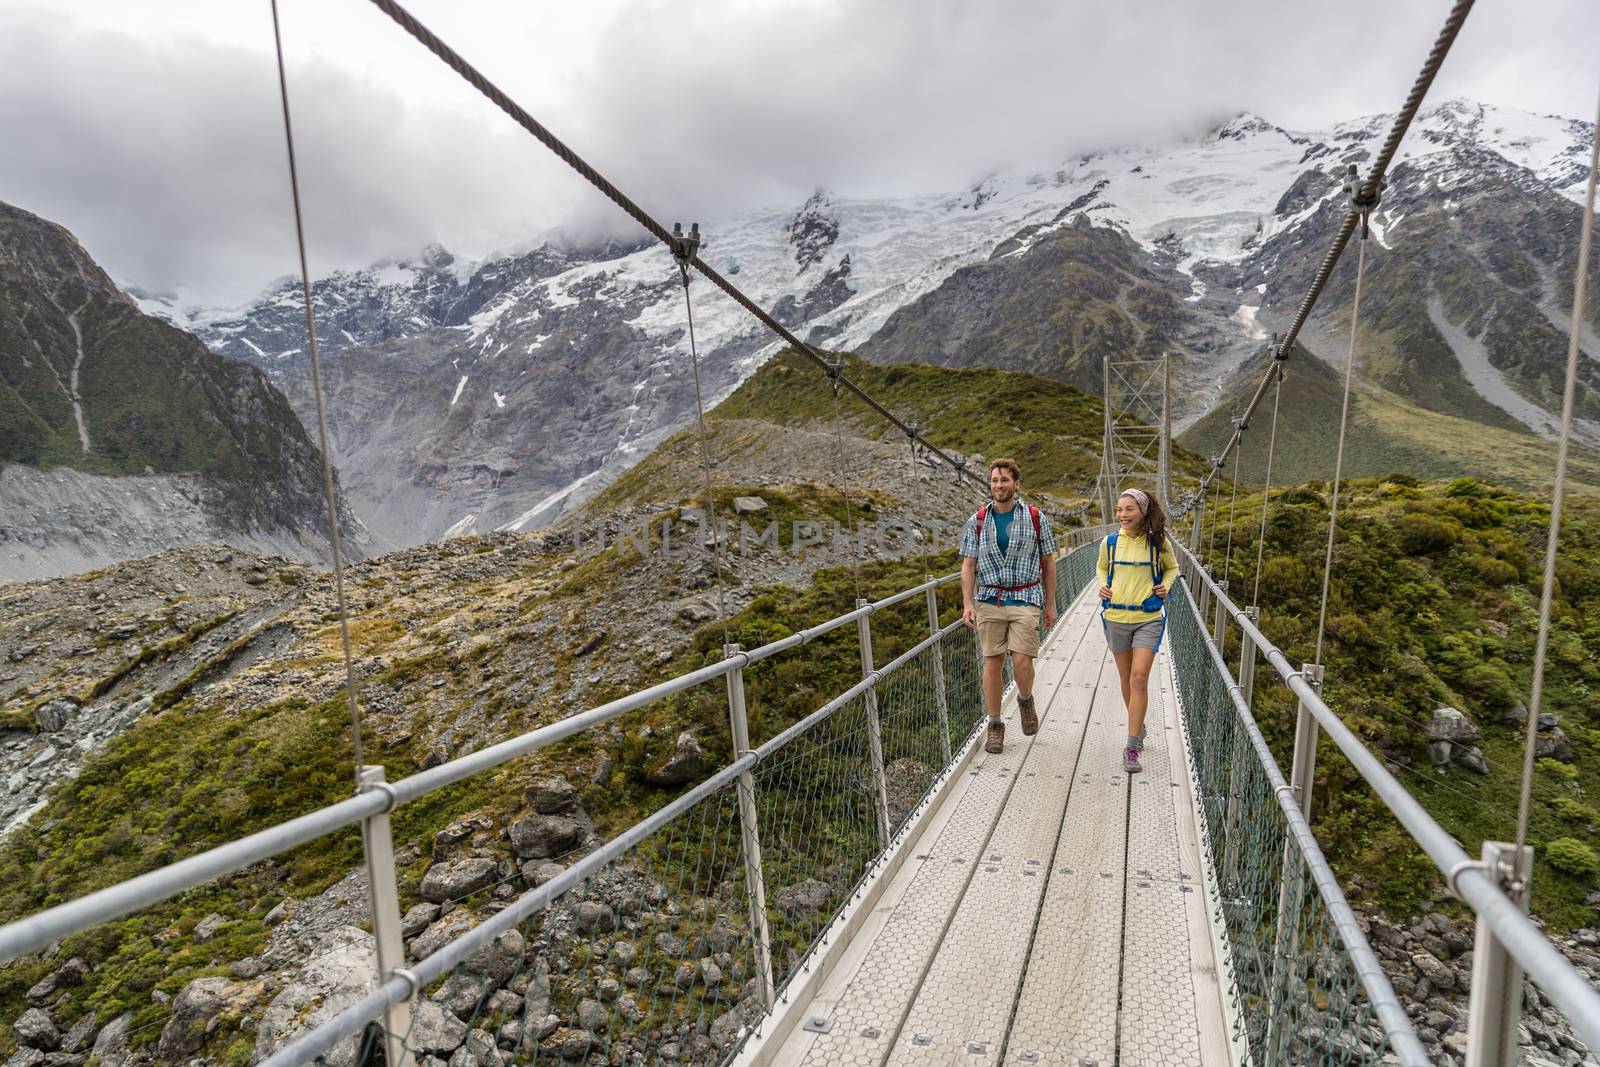 Hooker Valley Track hiking trail, New Zealand. Hikers people crossing bridge on the Hooker Valley track, Aoraki, Mt Cook National Park with snow capped mountains landscape.